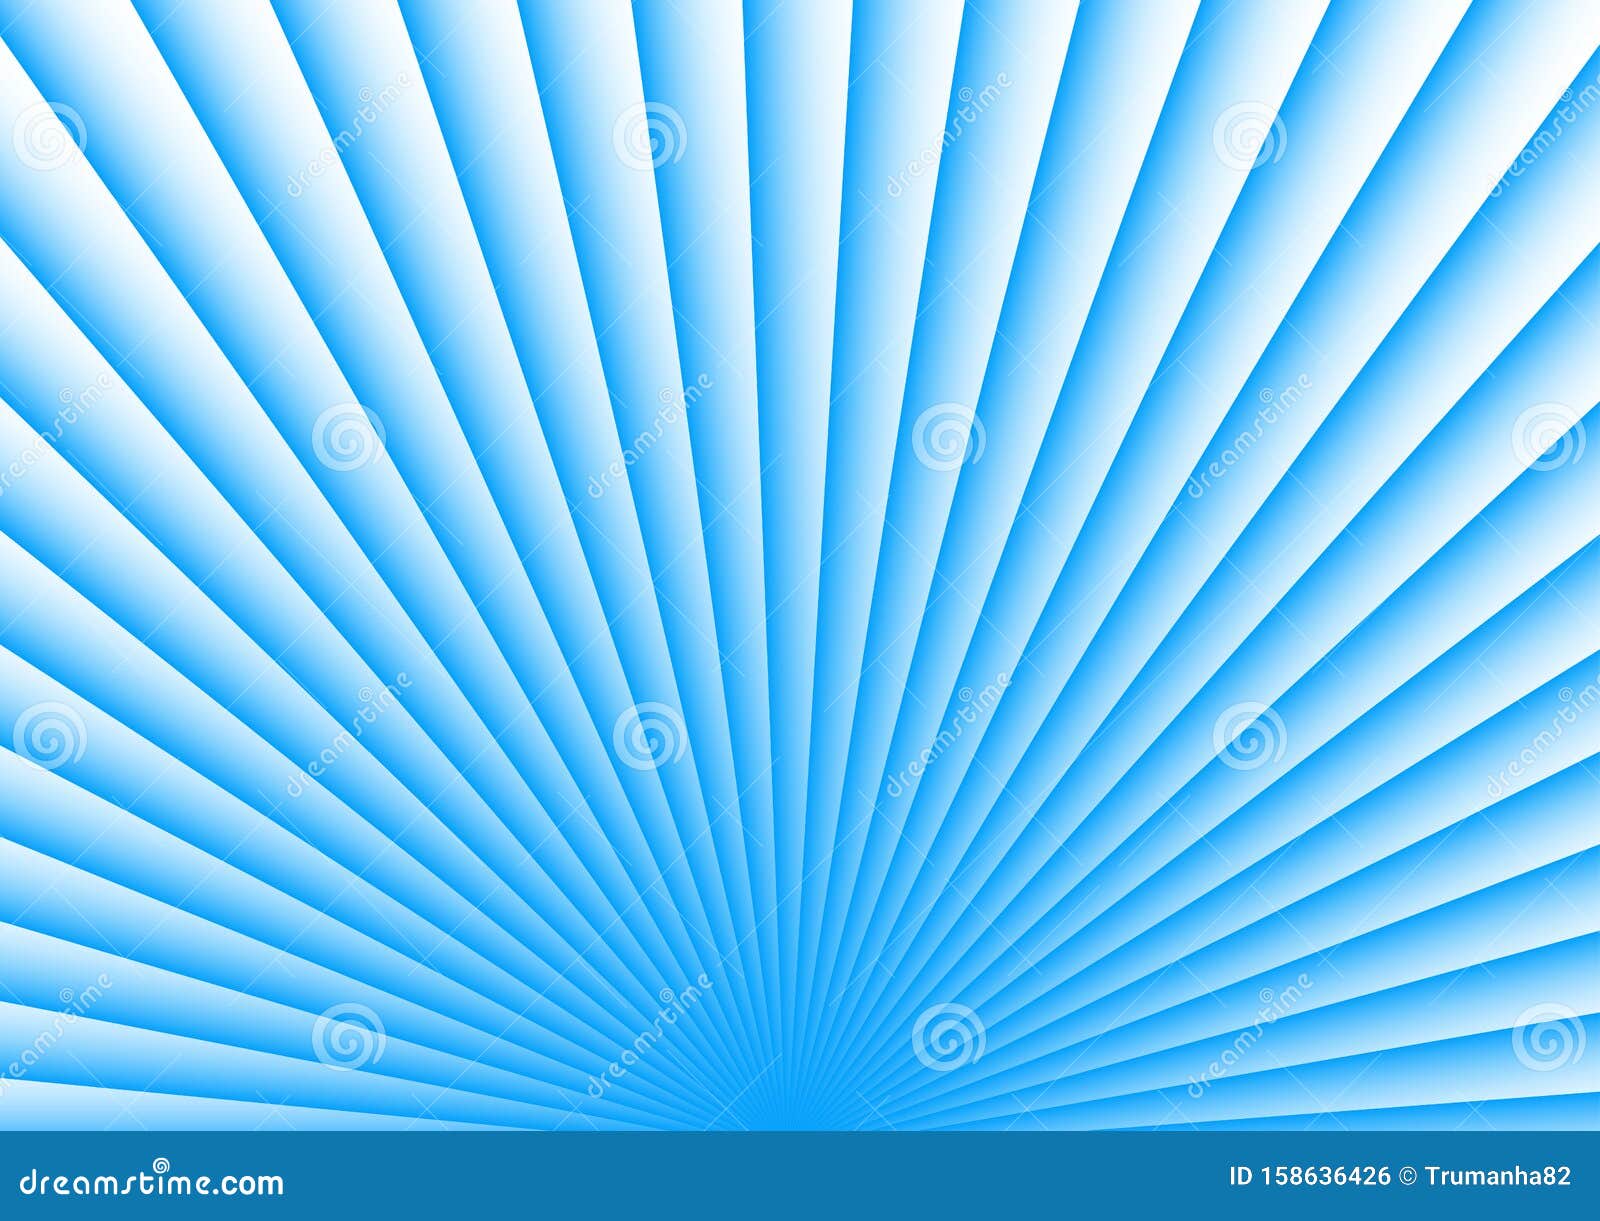 white and blue sector pattern for abstract background